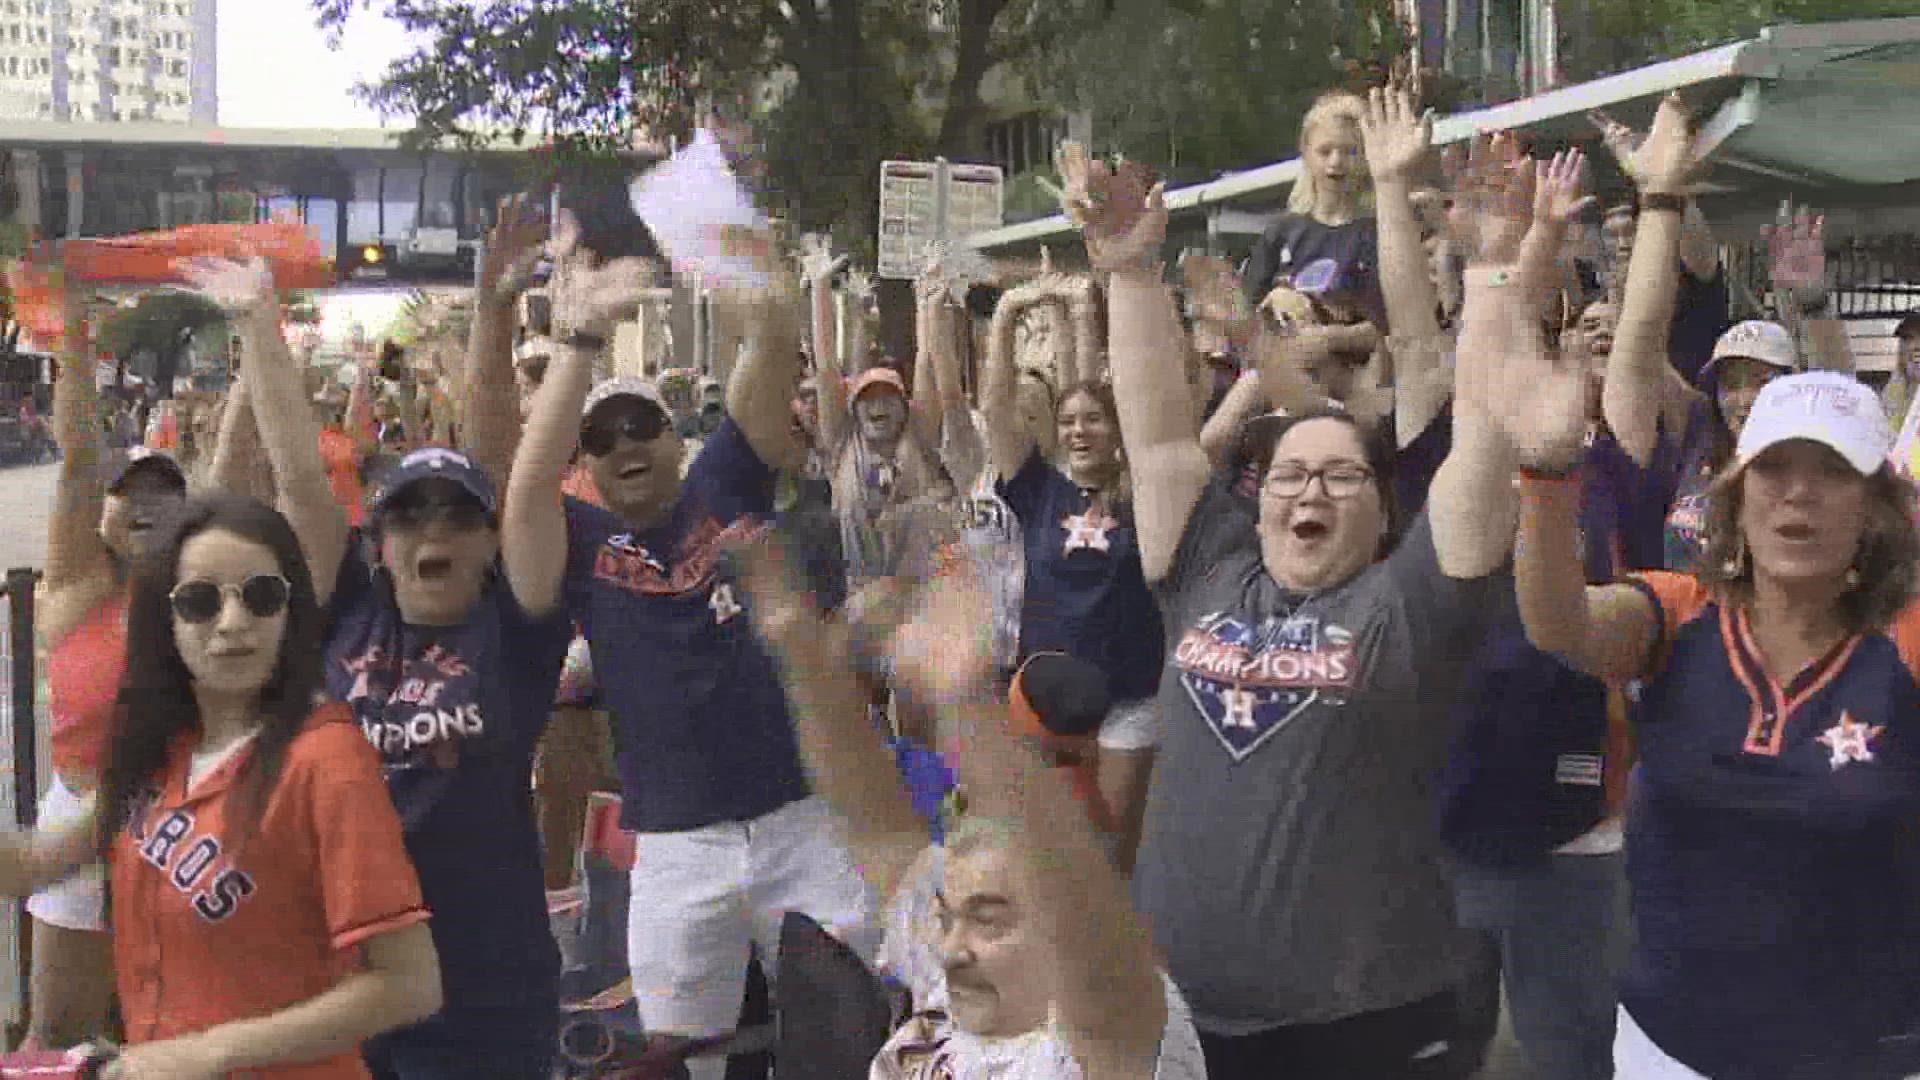 More than a million happy Astros fans headed downtown to celebrate the team and their World Series championship!